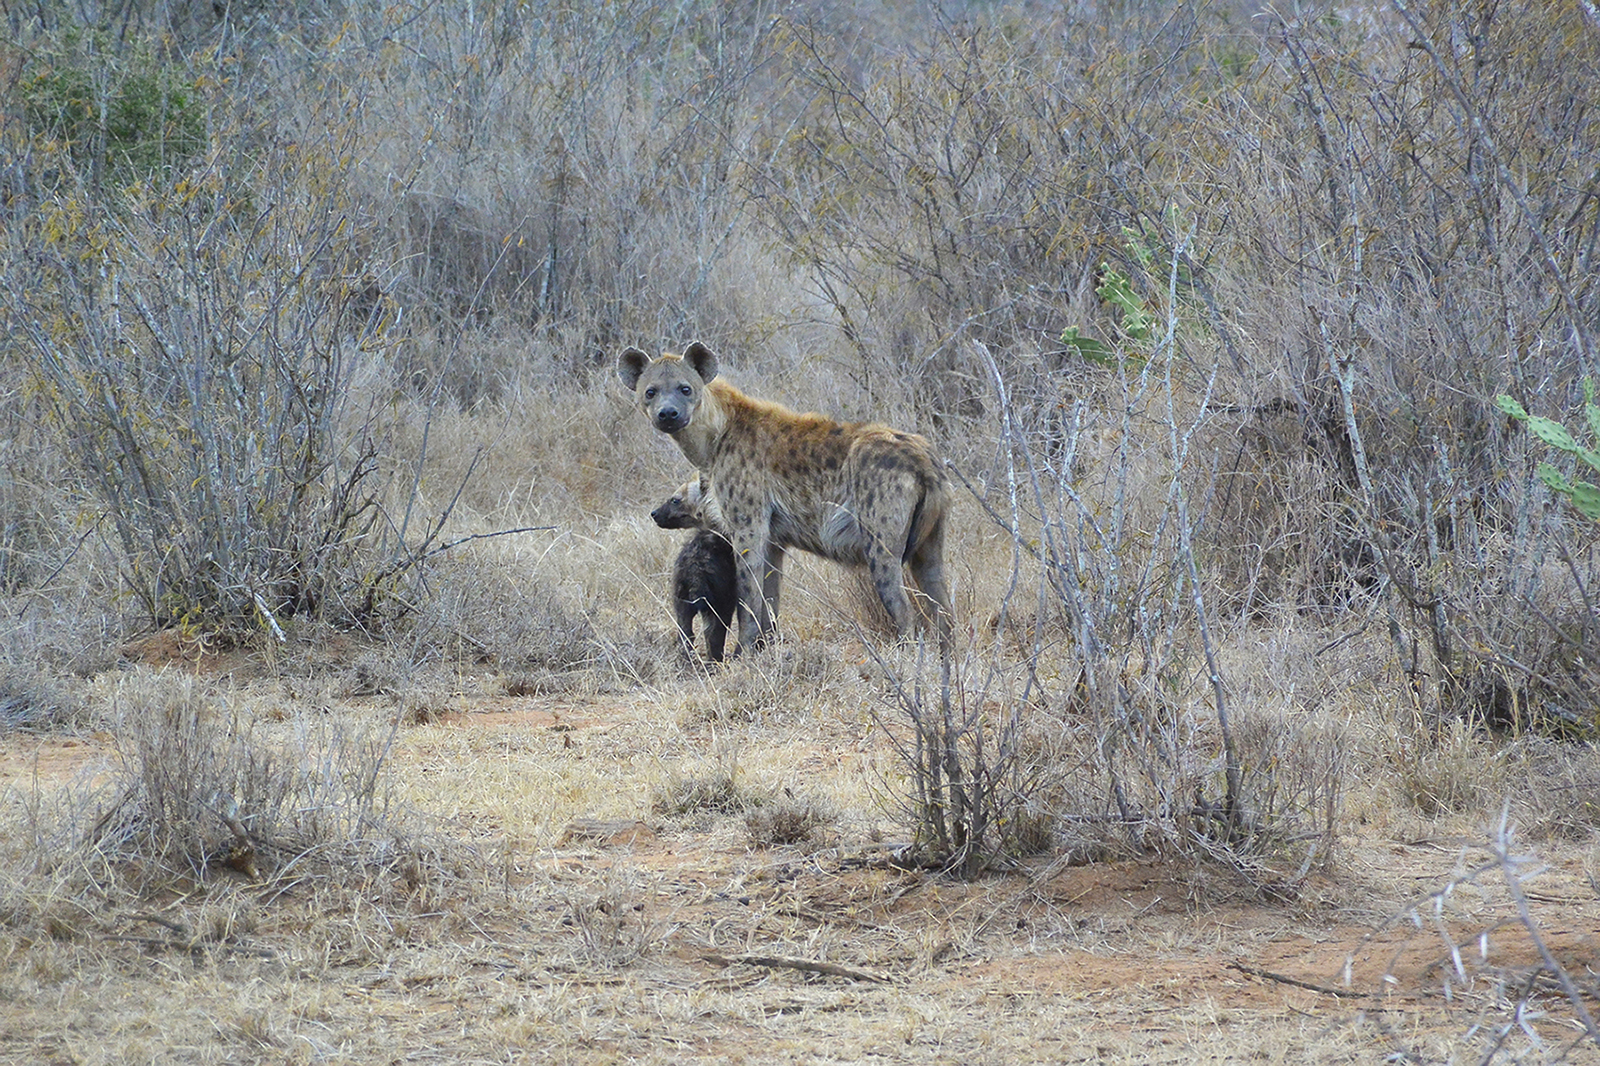 A Second Look at Hyenas, Part 1